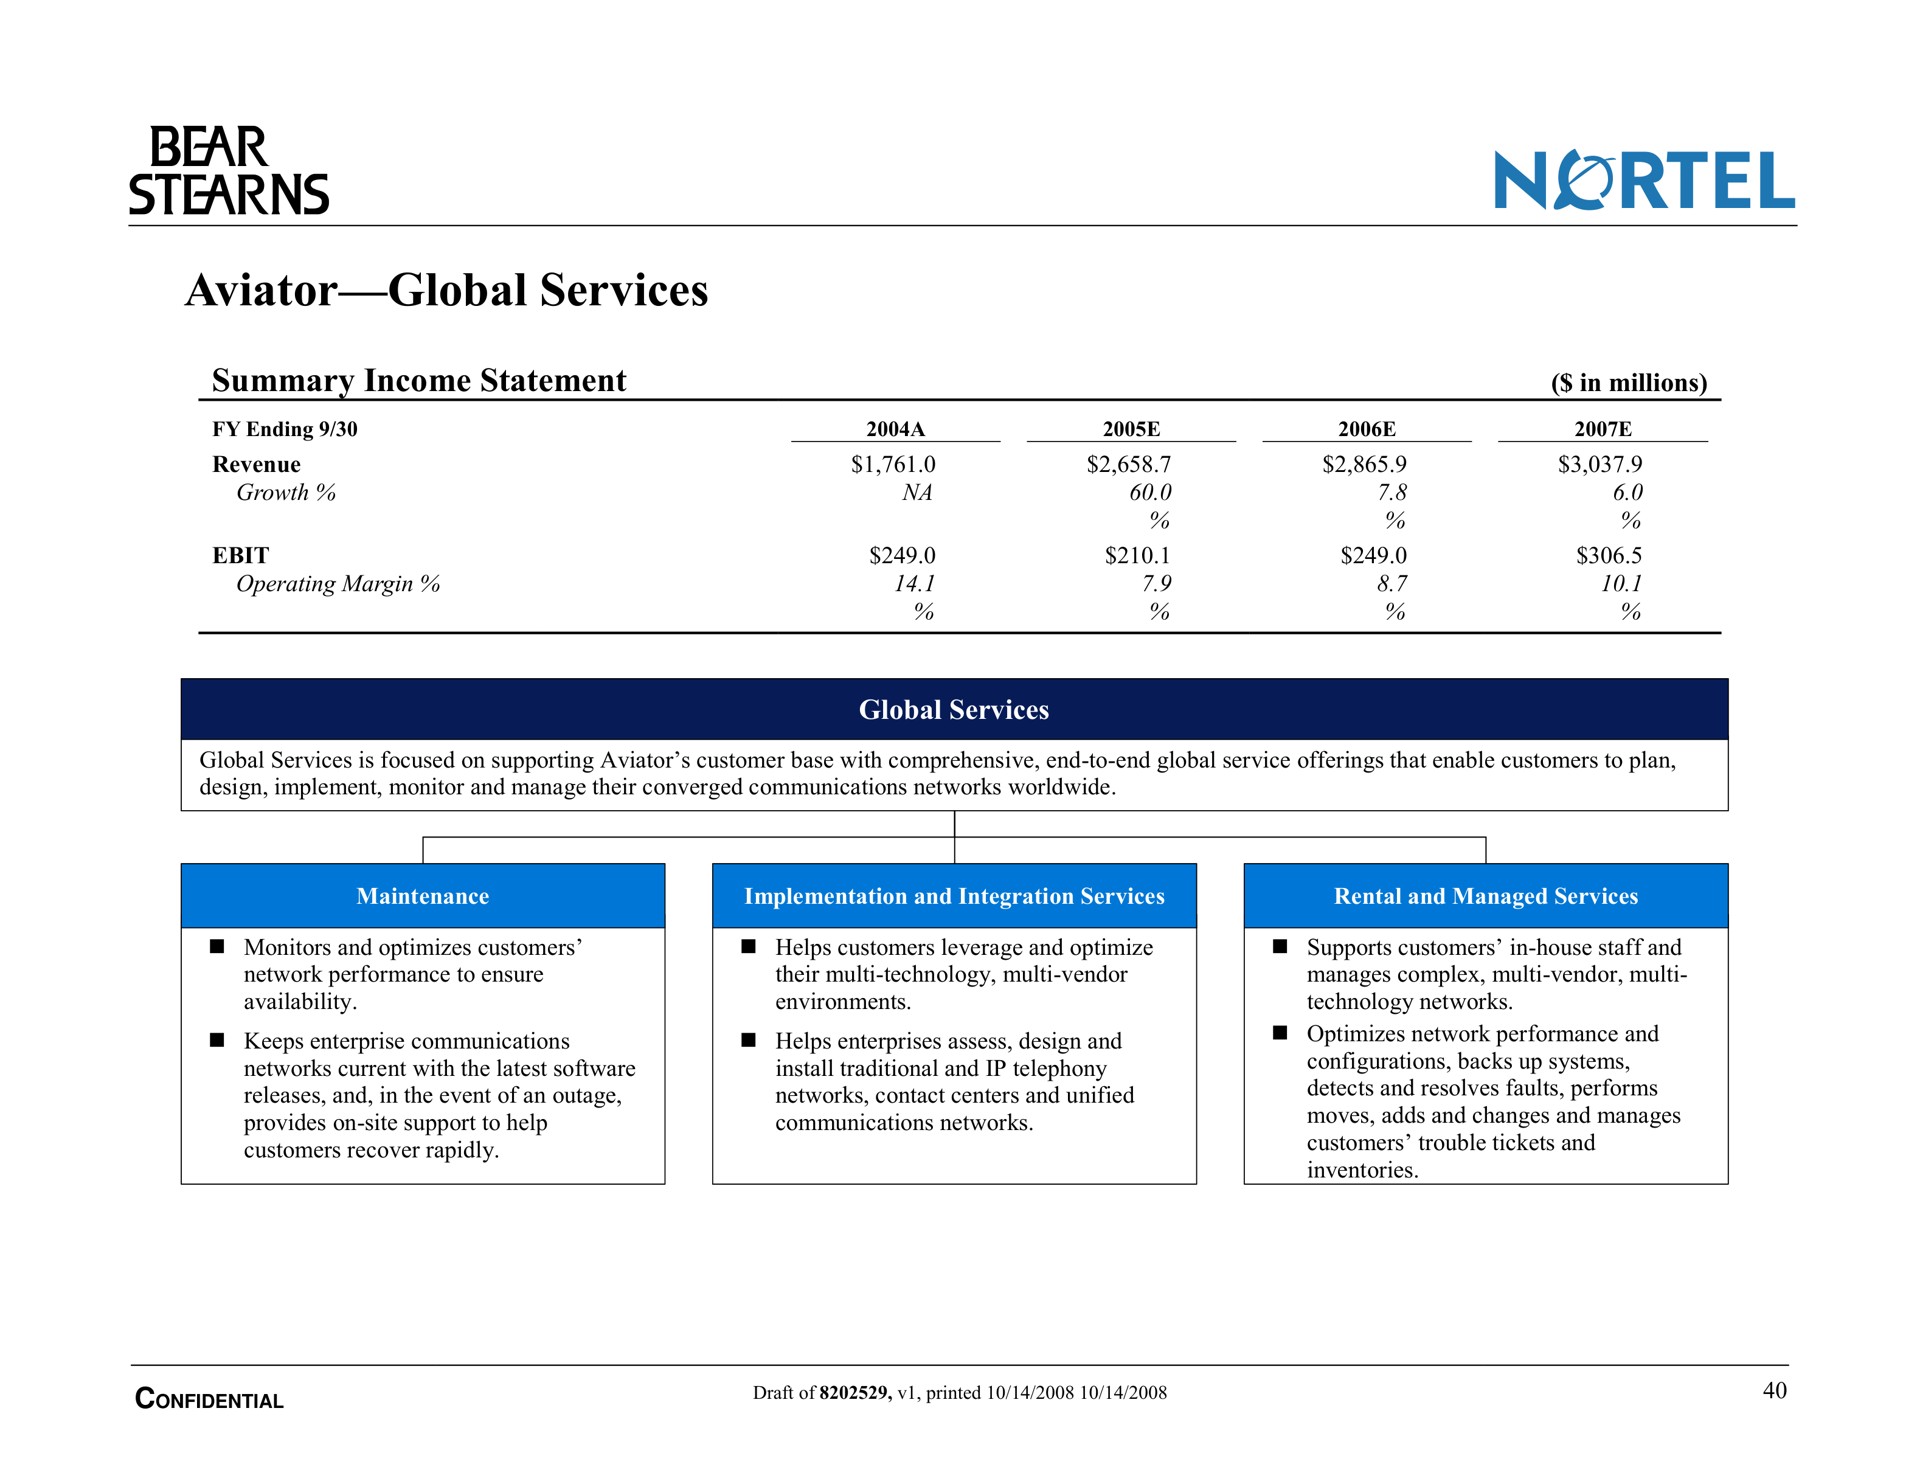 aviator global services summary income statement | Bear Stearns